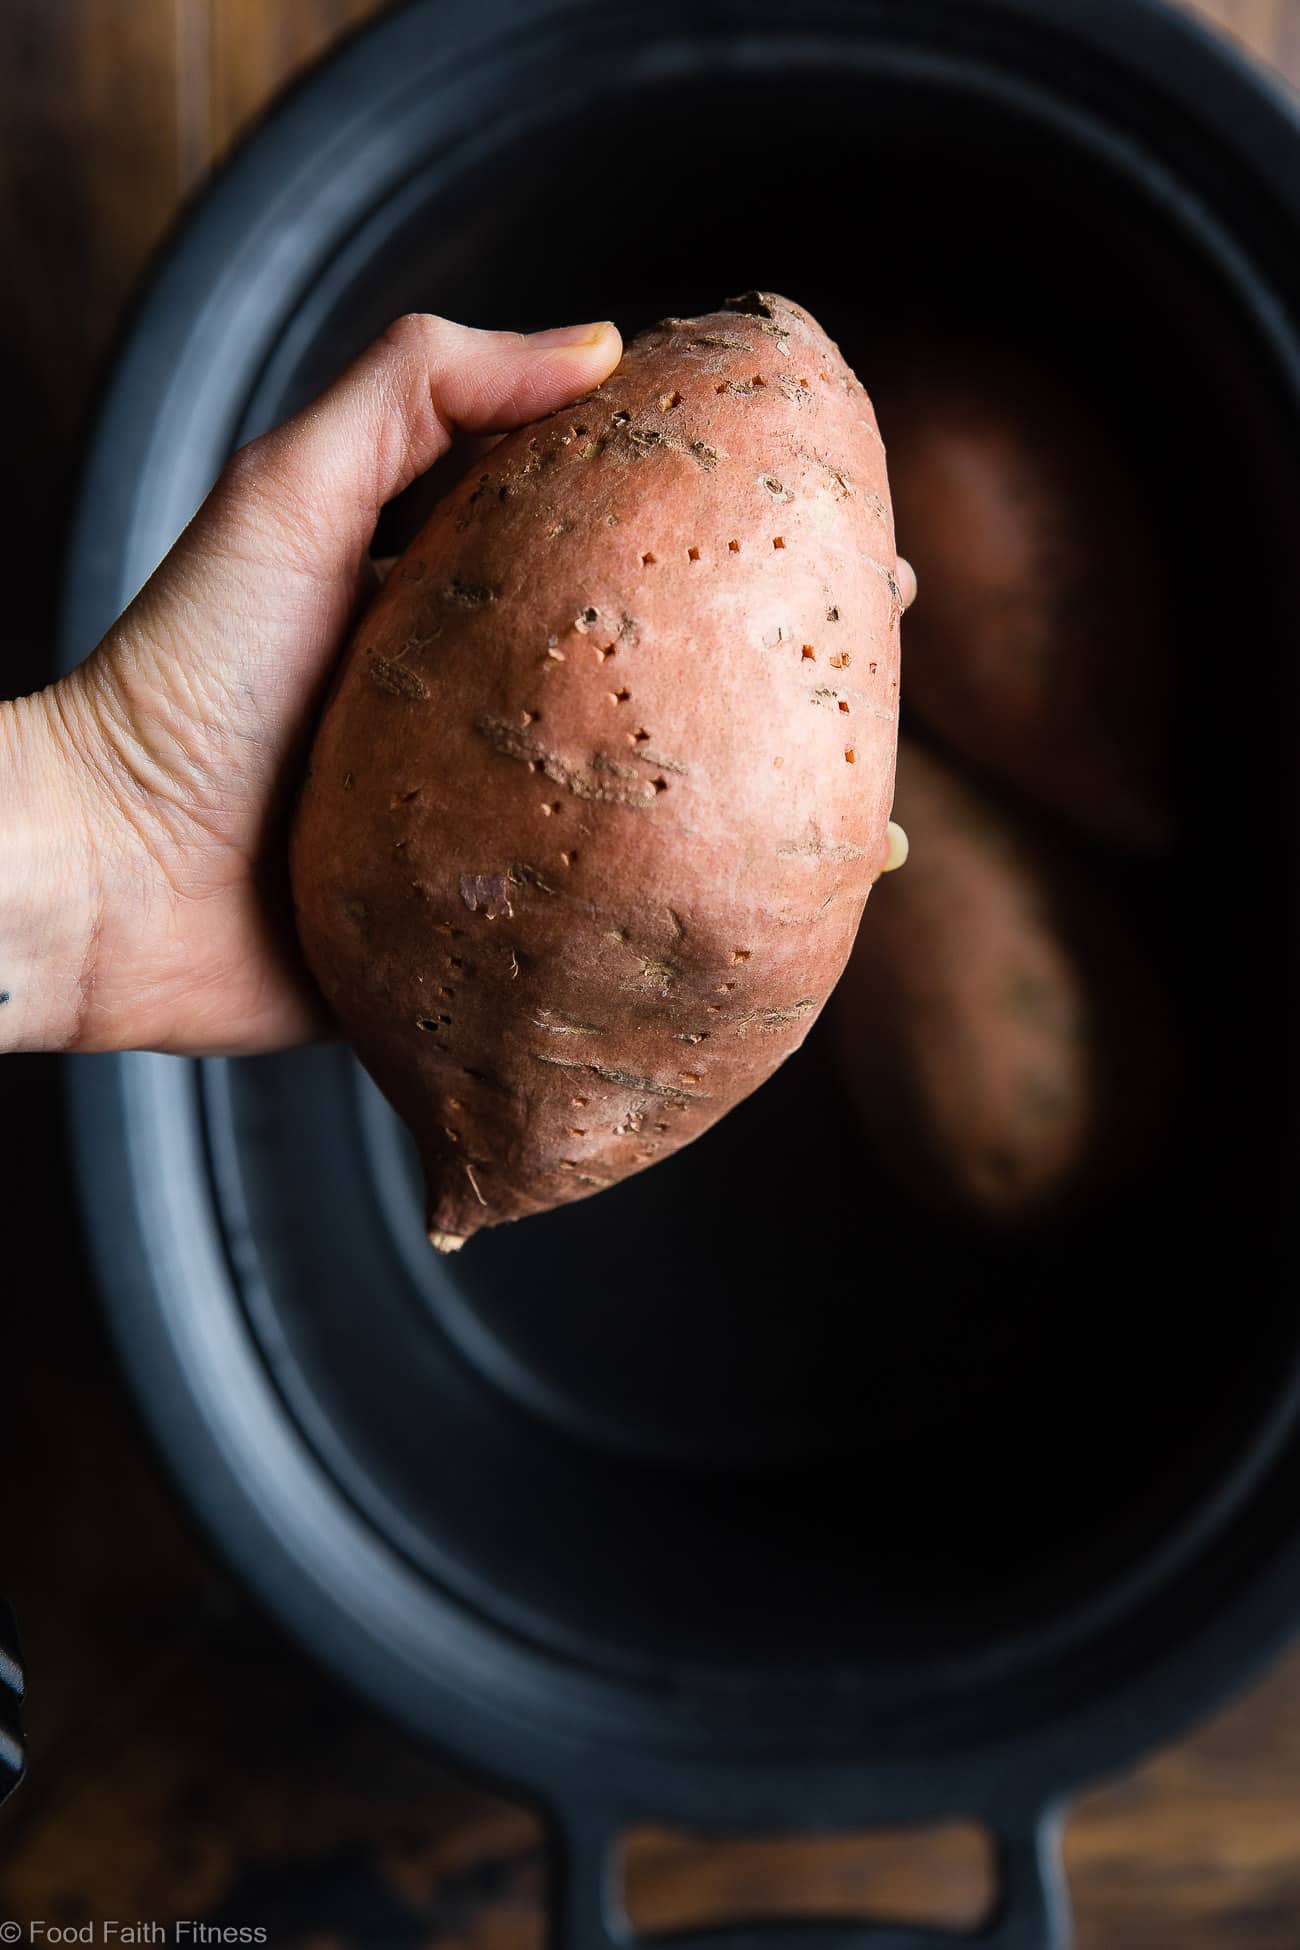 How to Cook Crock Pot Sweet Potatoes - Let the slow cooker do all the work for you! These sweet potatoes are SO easy and come out perfect EVERY TIME! A healthy, paleo, vegan and whole30 side dish! | #Foodfaithfitness | #Paleo #Glutenfree #Healthy #Slowcooker #Crockpot